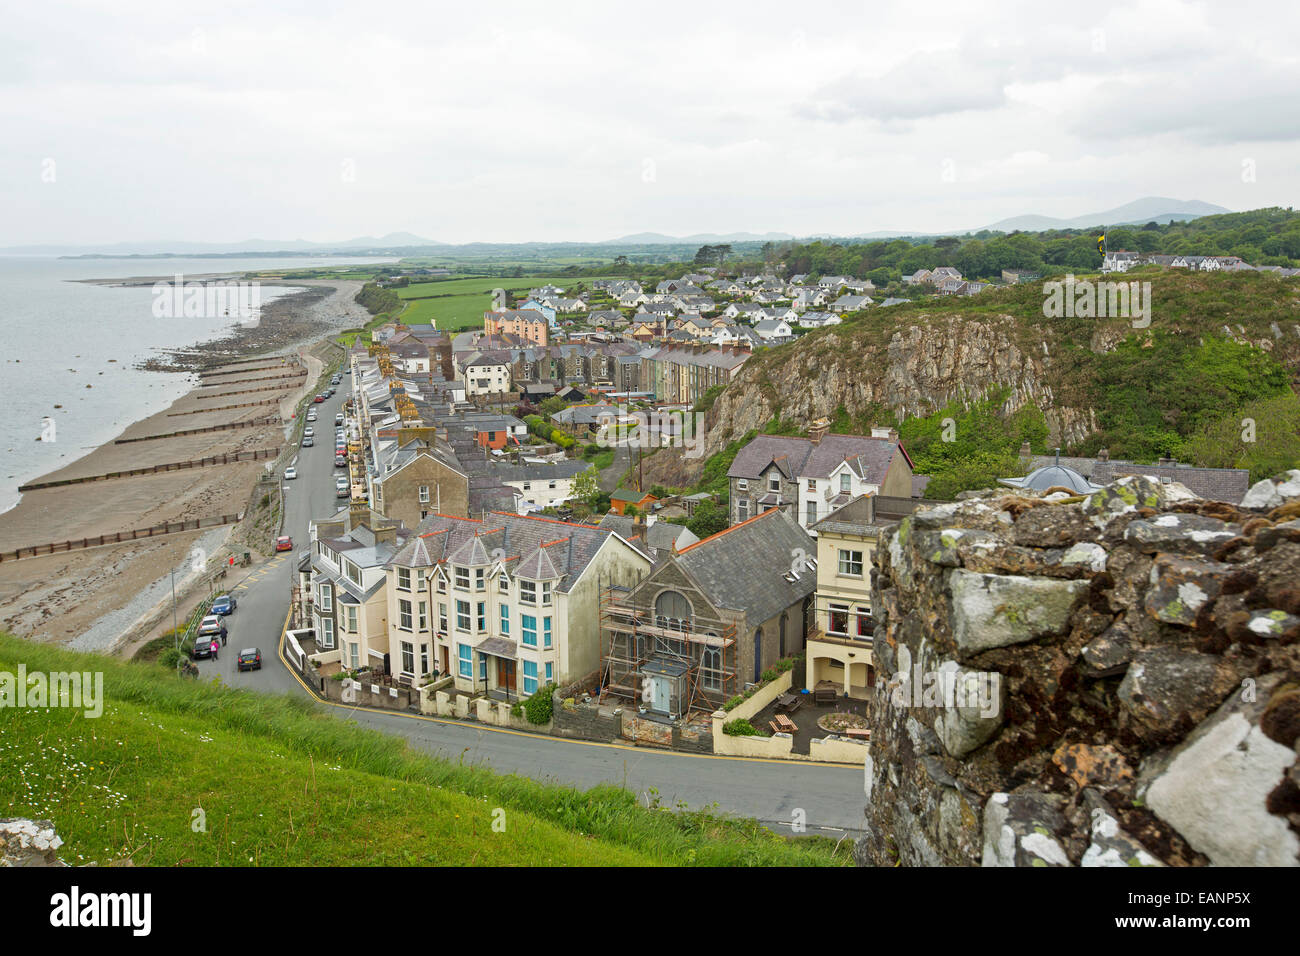 View, from hilltop castle, of historic Welsh town of Criccieth with row of houses by road bordering sandy beach of Cardigan Bay Stock Photo